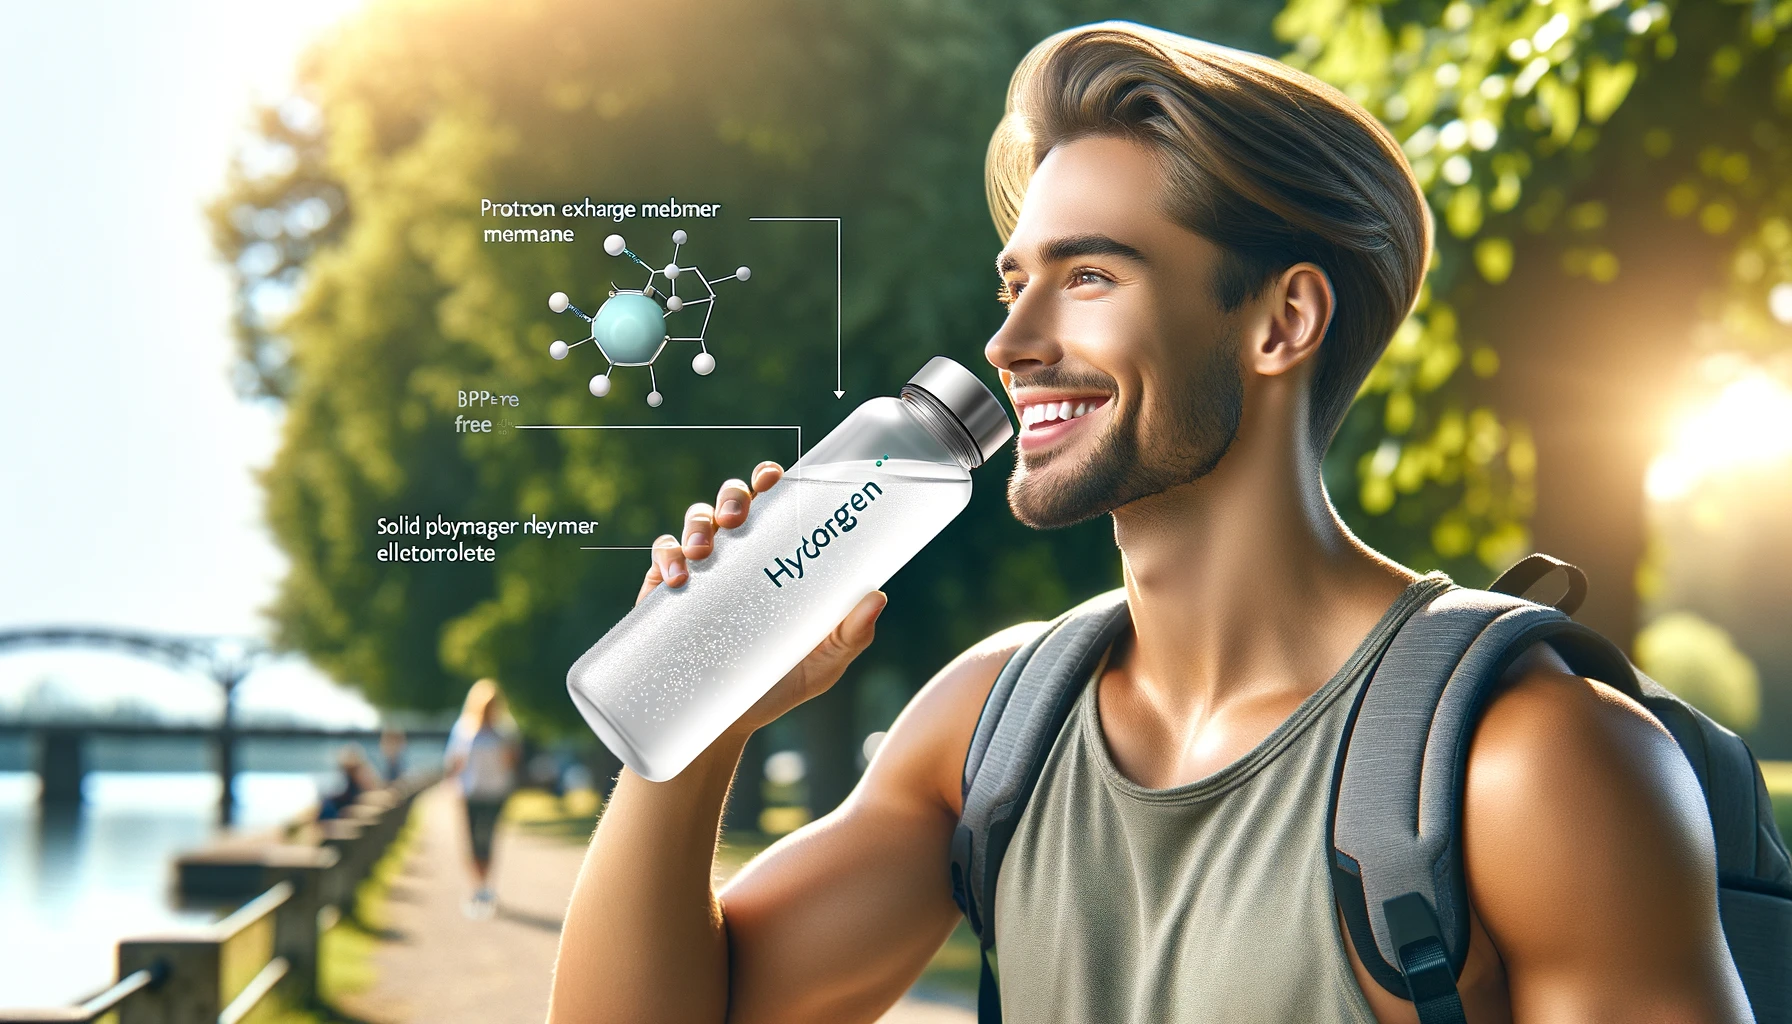 what to look for when buying a hydrogen water bottle